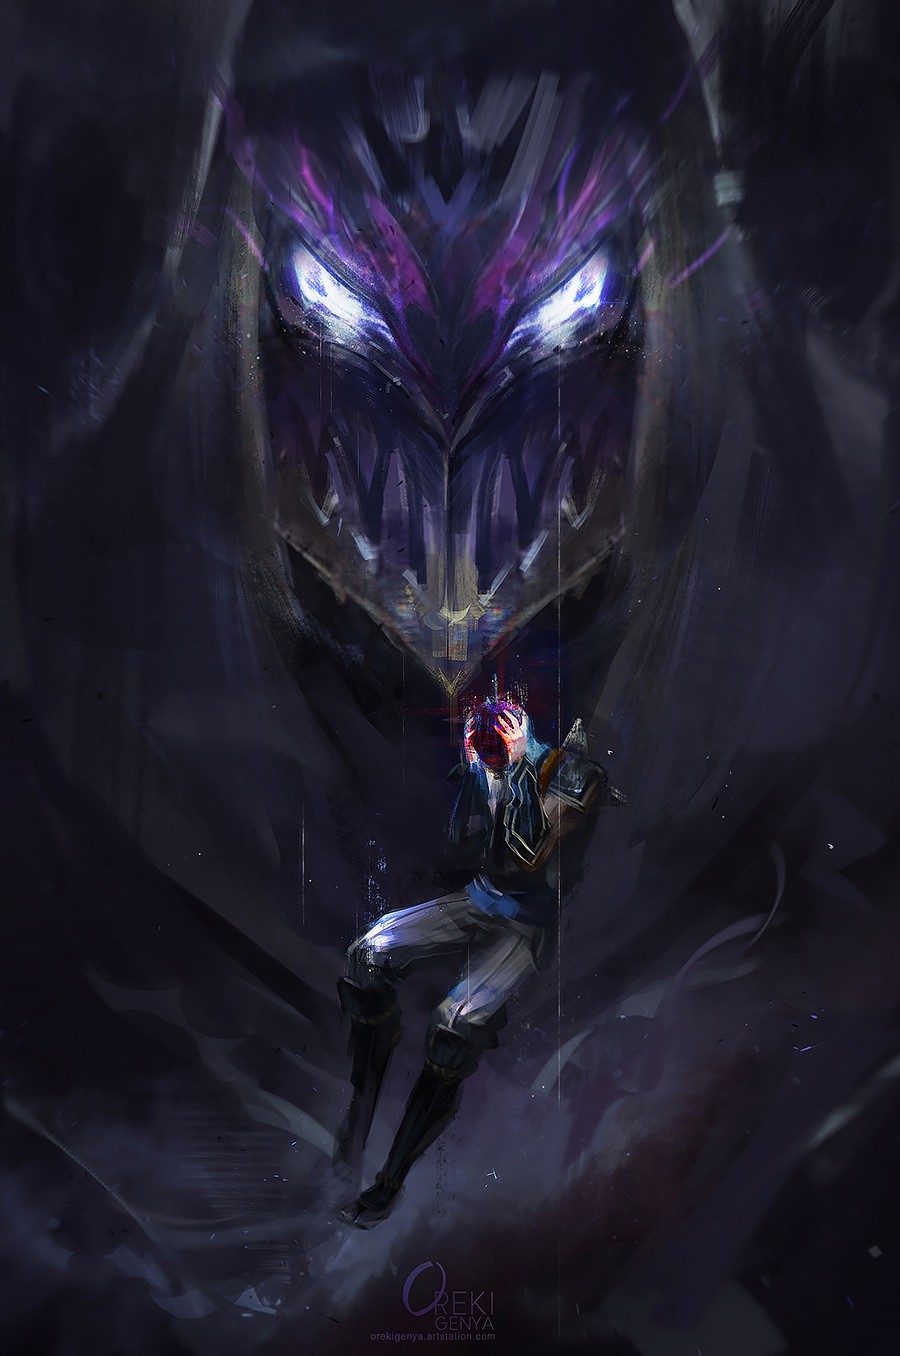 Kayn And Zed Wallpapers